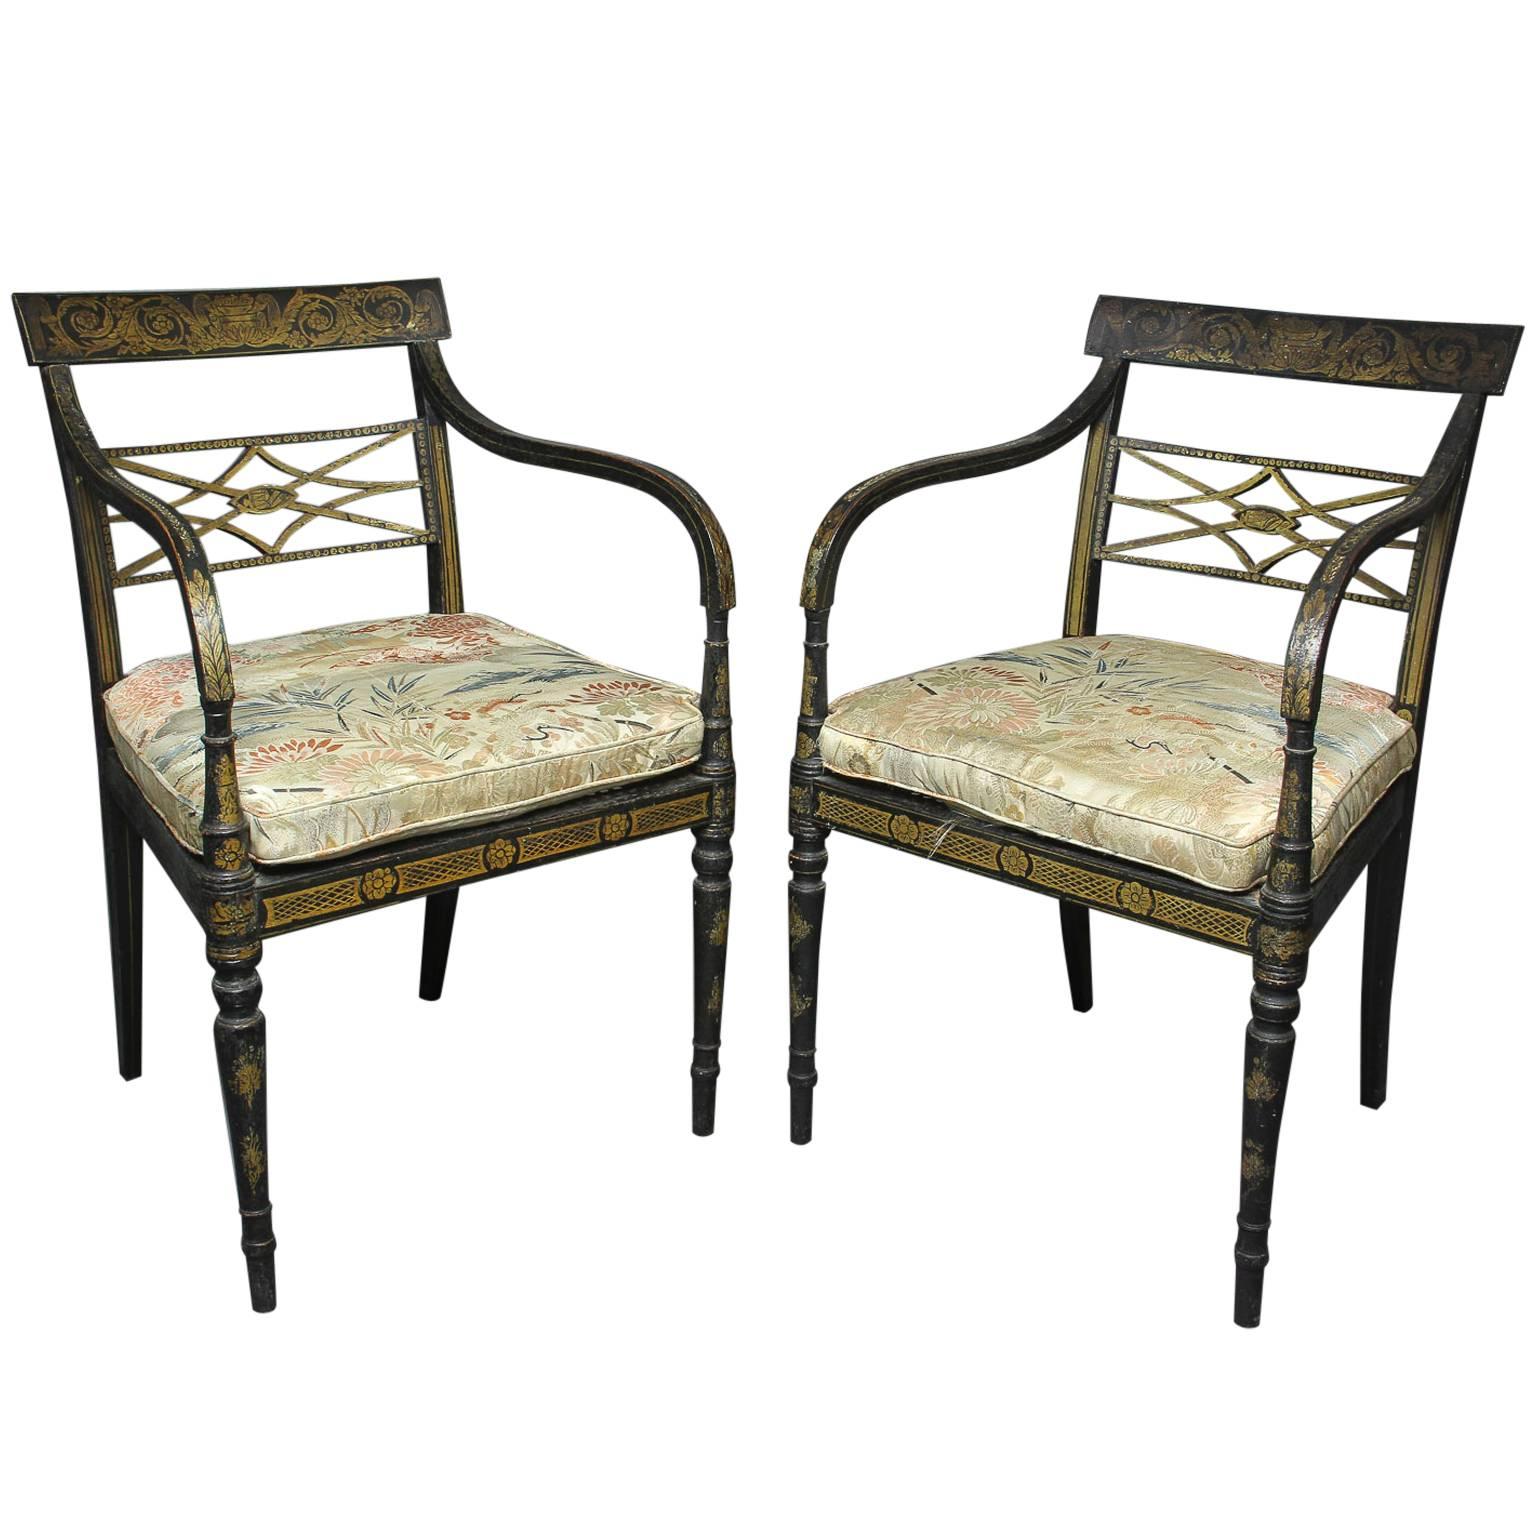 Pair of Regency Ebonized and Gilded Armchairs